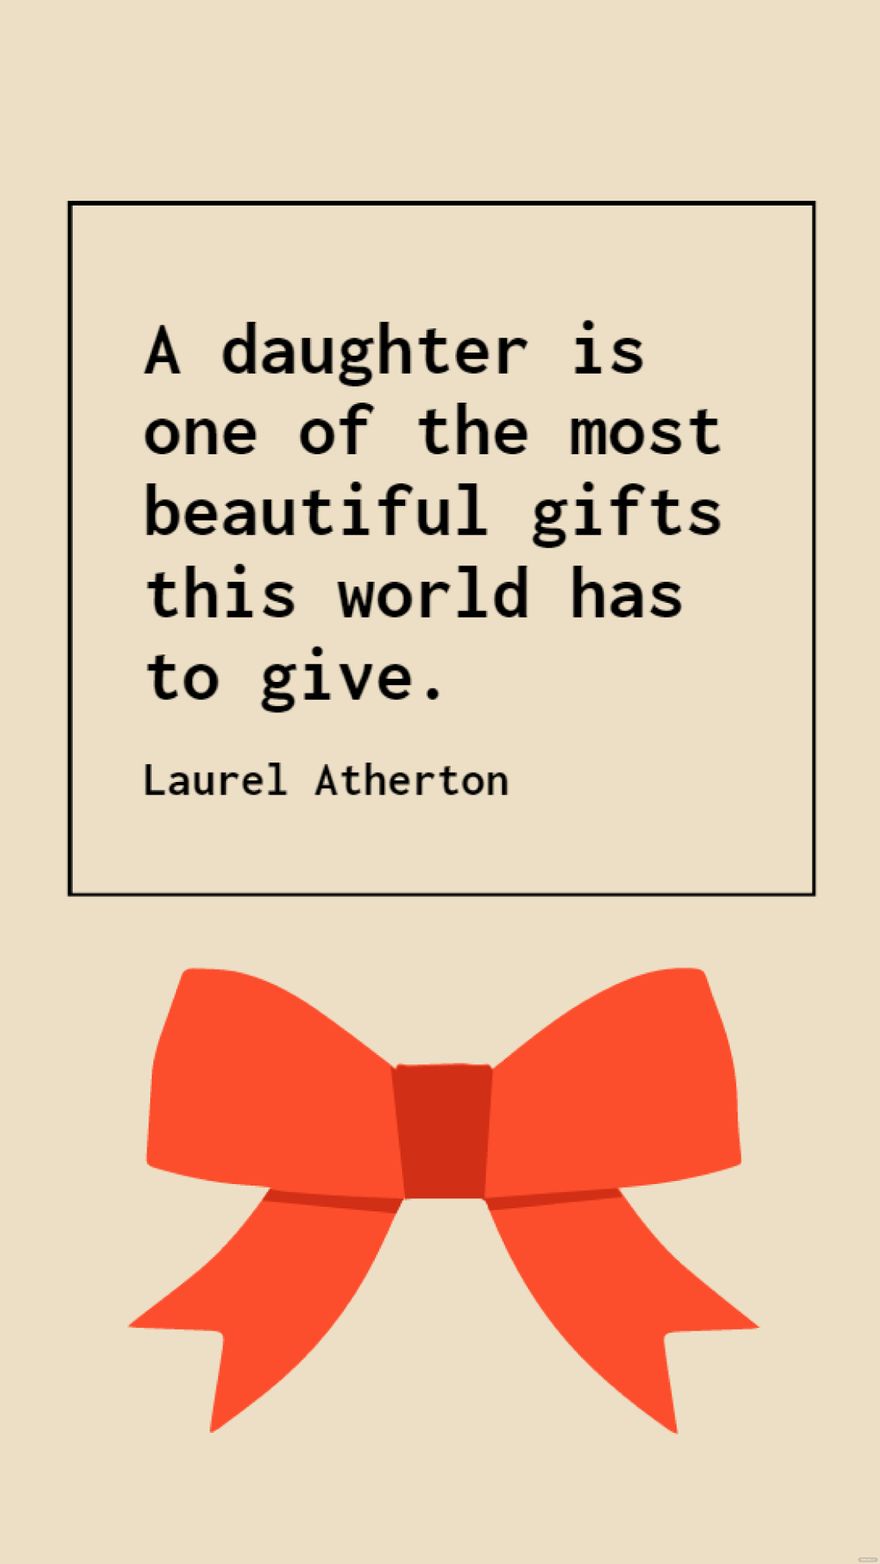 Free Laurel Atherton - A daughter is one of the most beautiful gifts this world has to give.